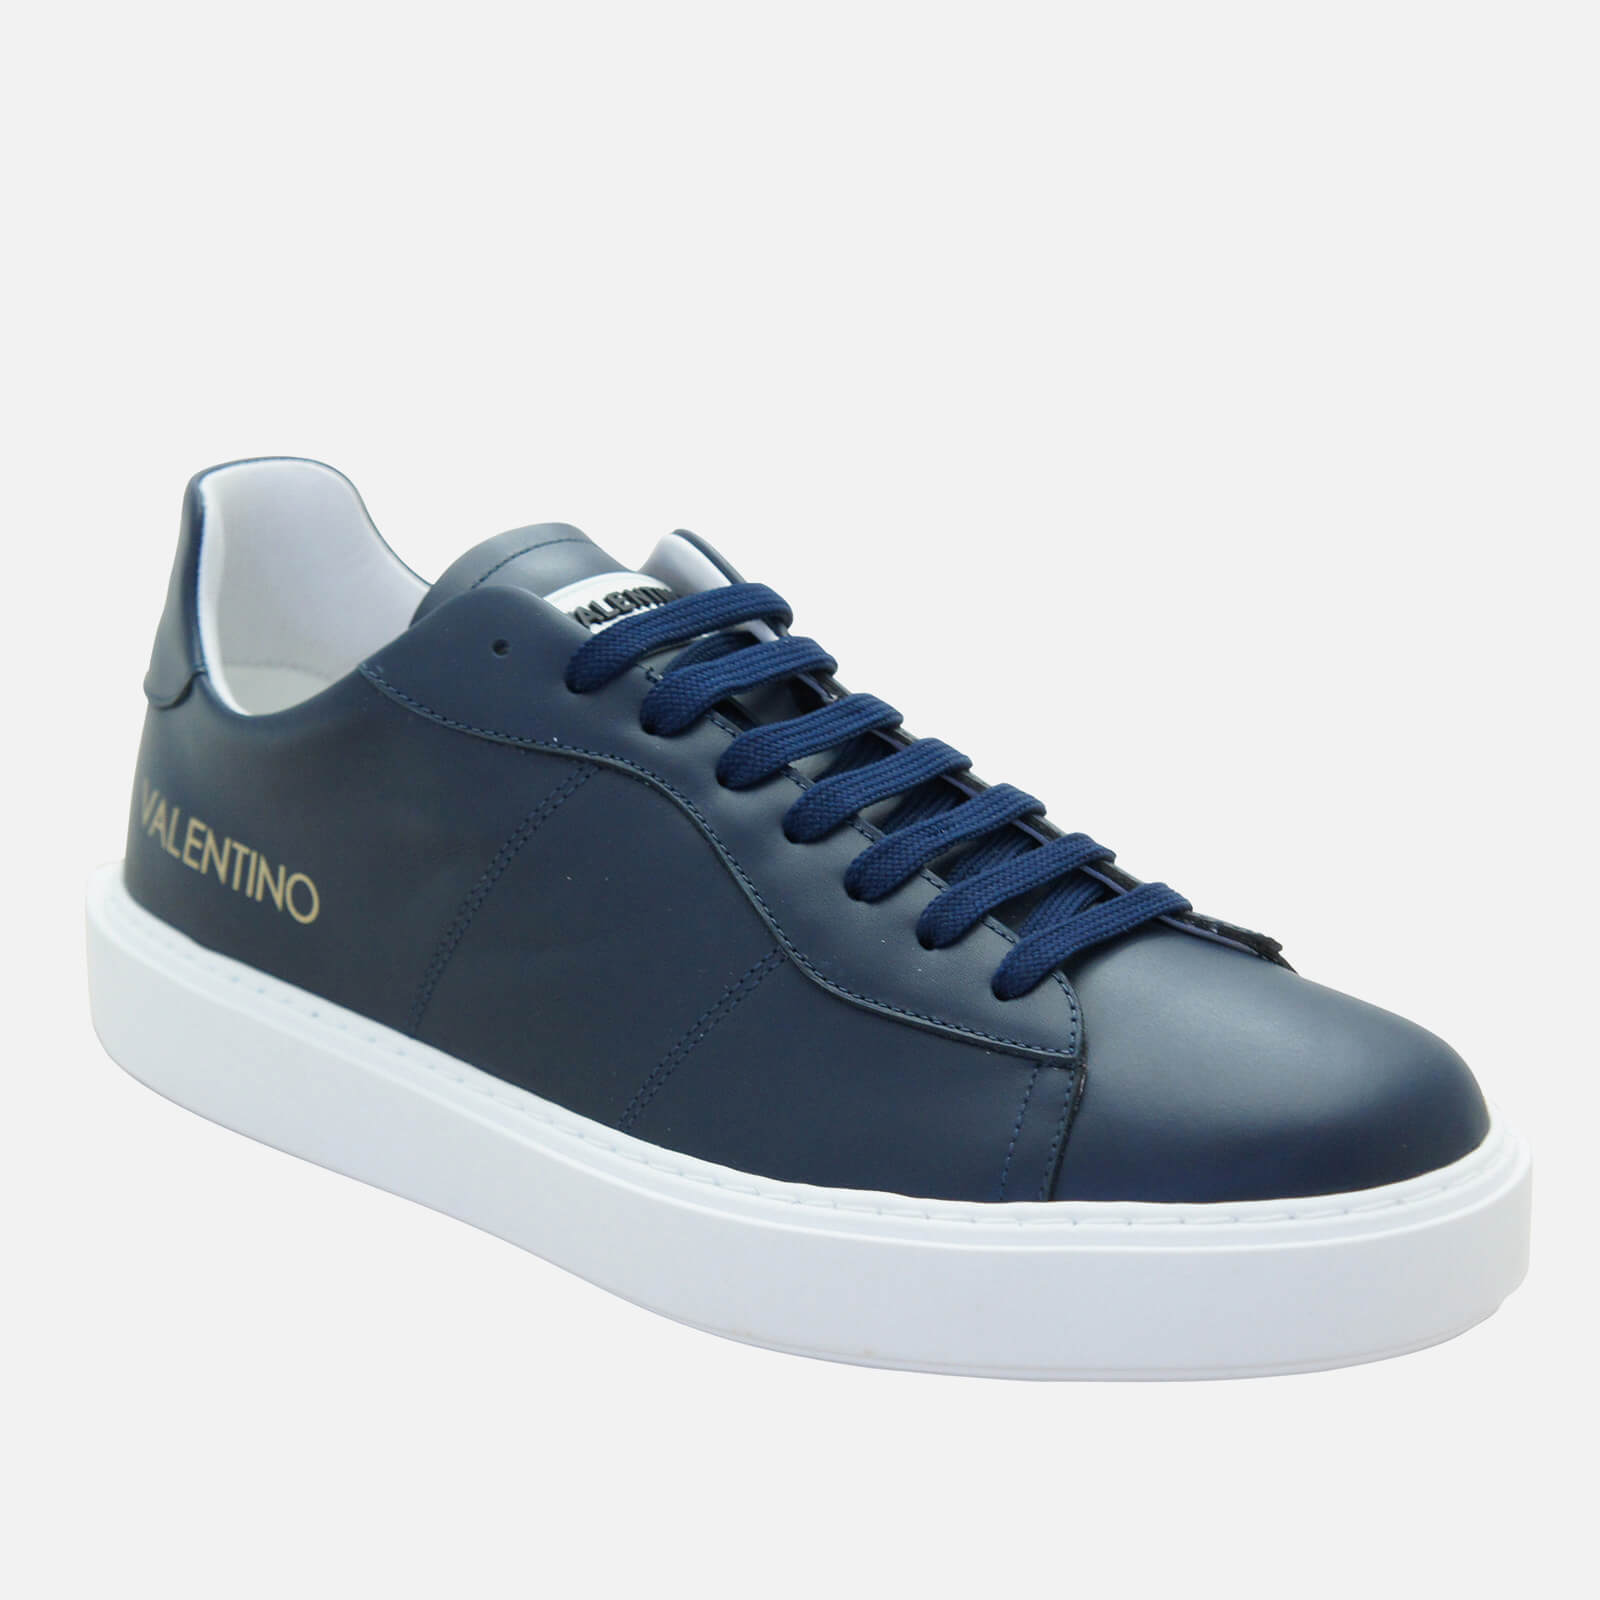 Valentino Shoes Men's Leather Cupsole Trainers - Blue - UK 8